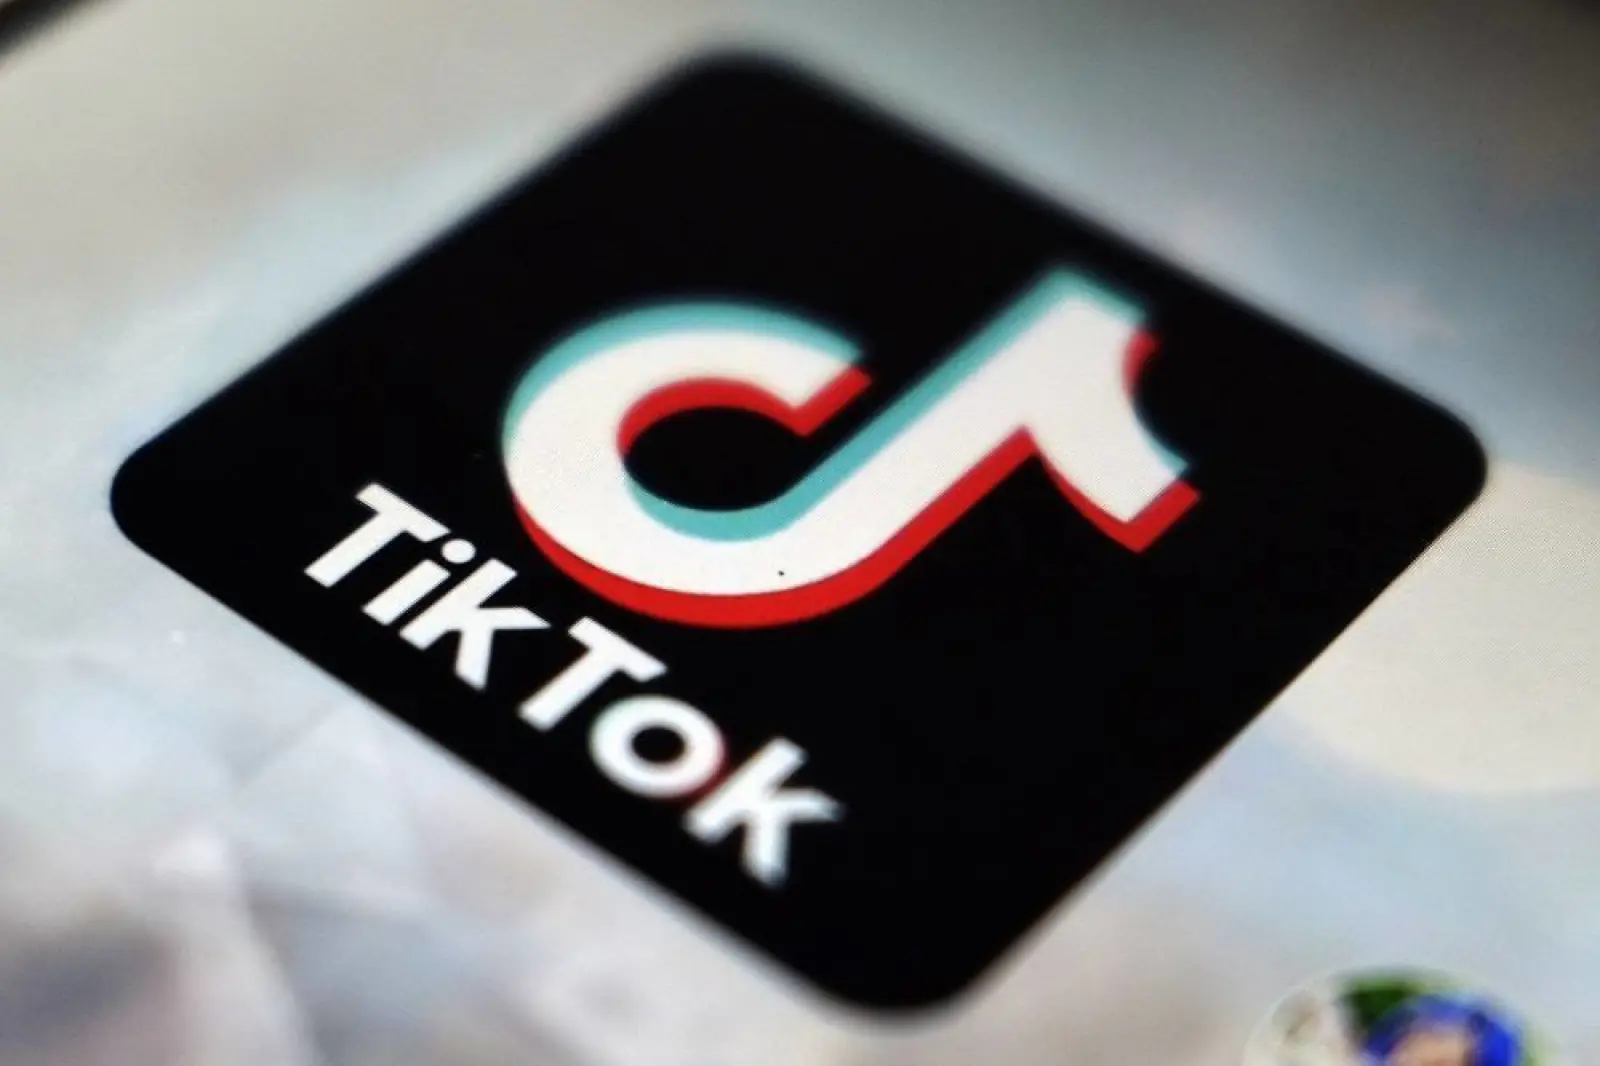 China is keeping an eye on internet users through TikTok and other apps